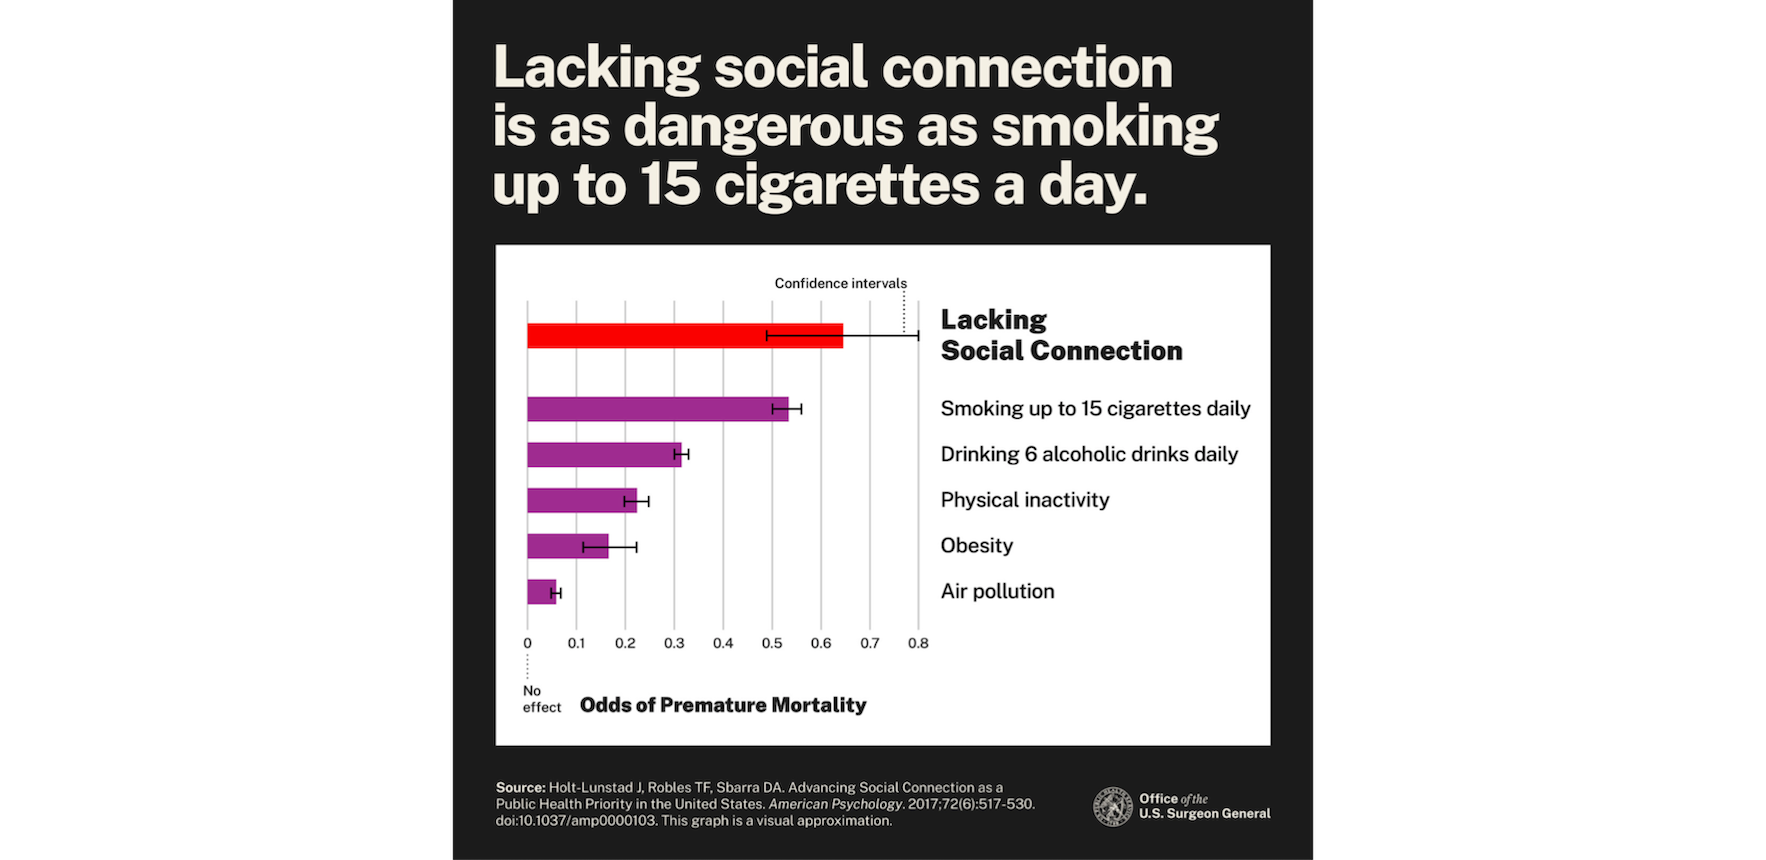 Bar chart with confidence intervals showing that lacking social connection is as dangerous as smoking up to 15 cigarettes a day. Also shown, with decreasing size, are bars for drinking six alcoholic drinks daily, physical inactivity, obesity, and air pollution. Features logo of the Office of the US Surgeon General.